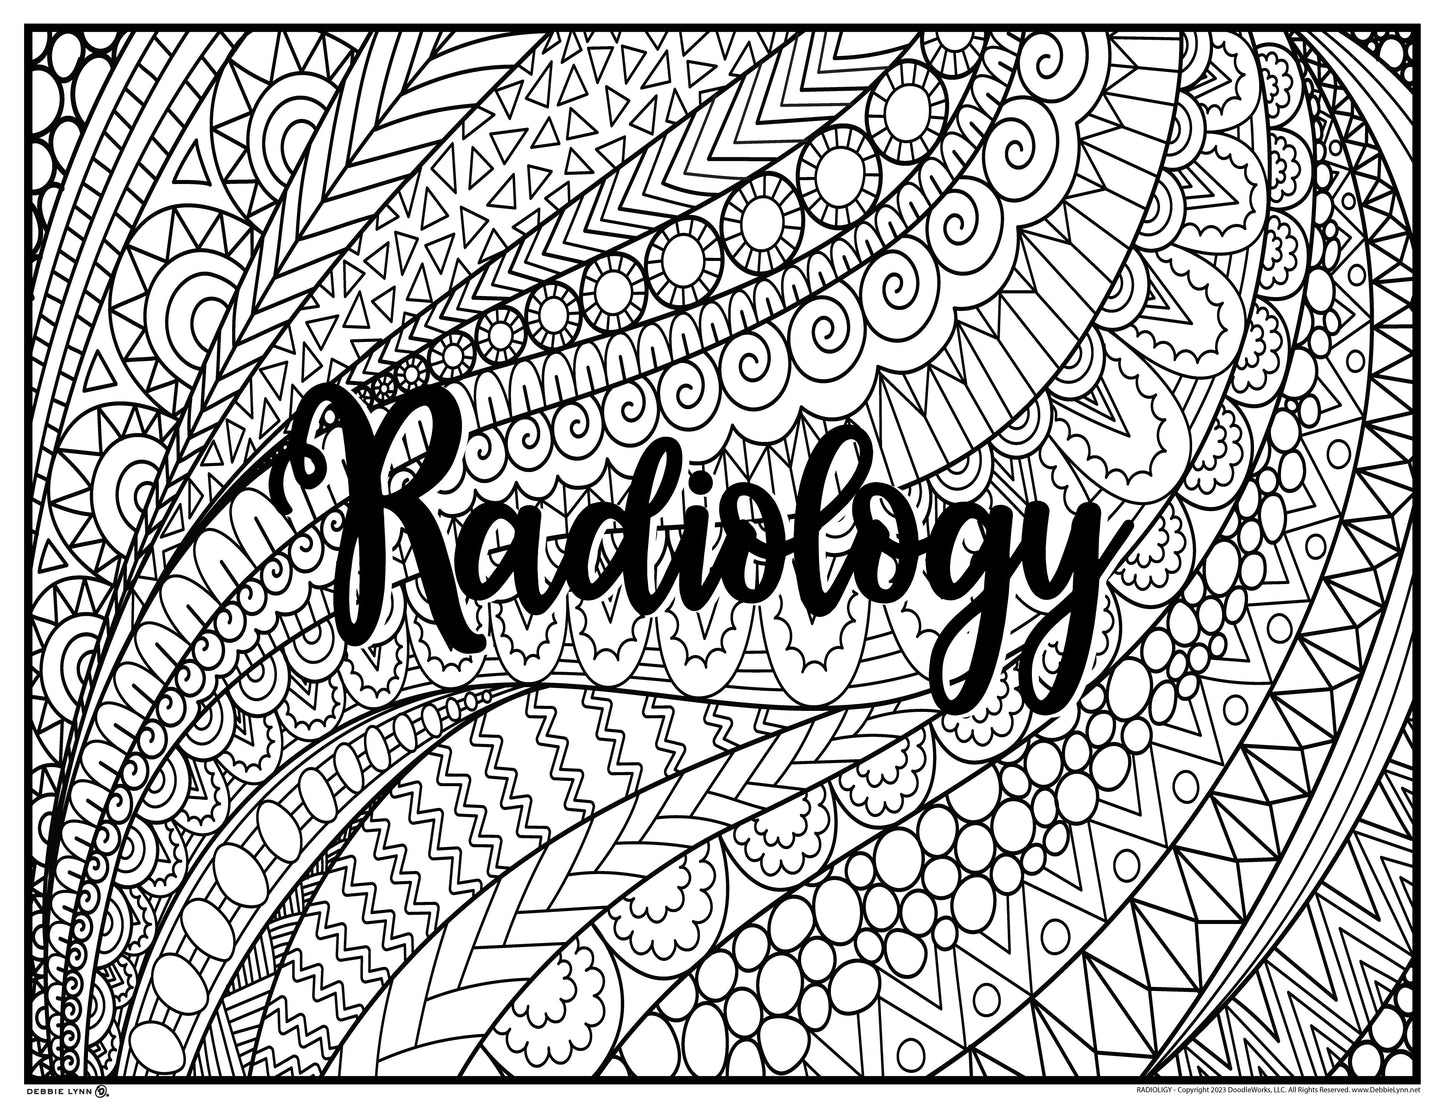 Radiology Personalized Giant Coloring Poster